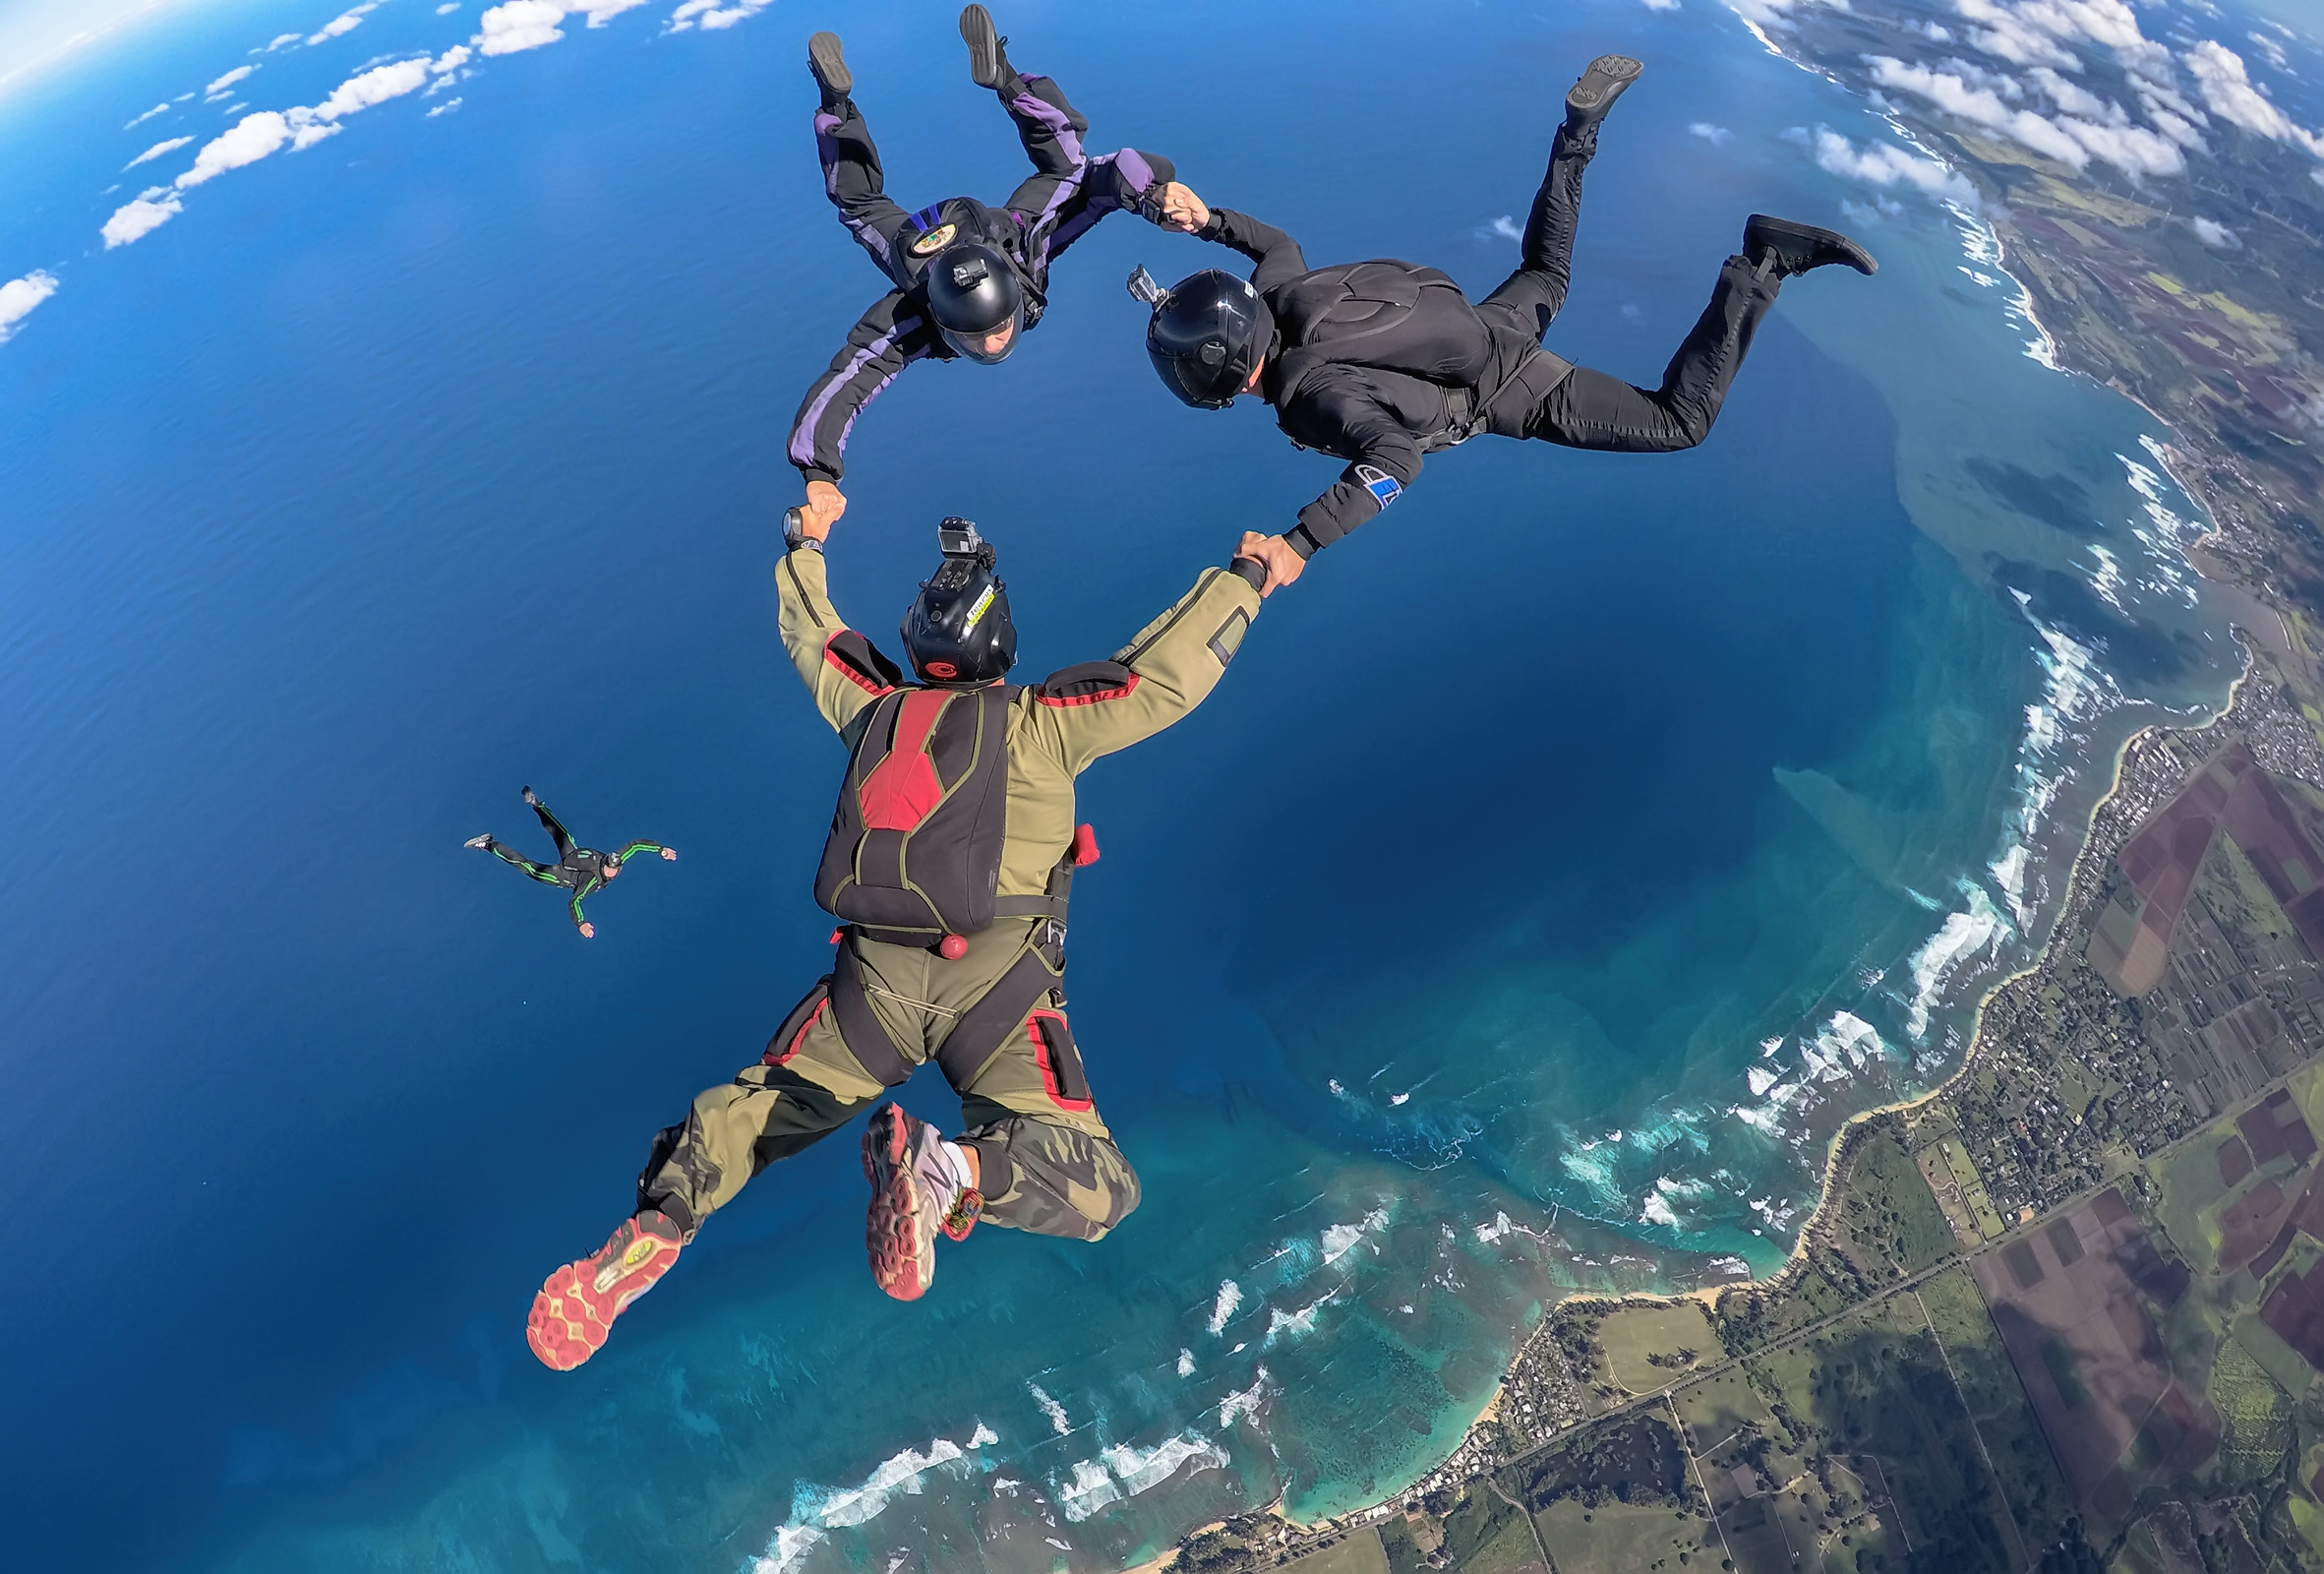 Pacific Skydiving Center Hawaii